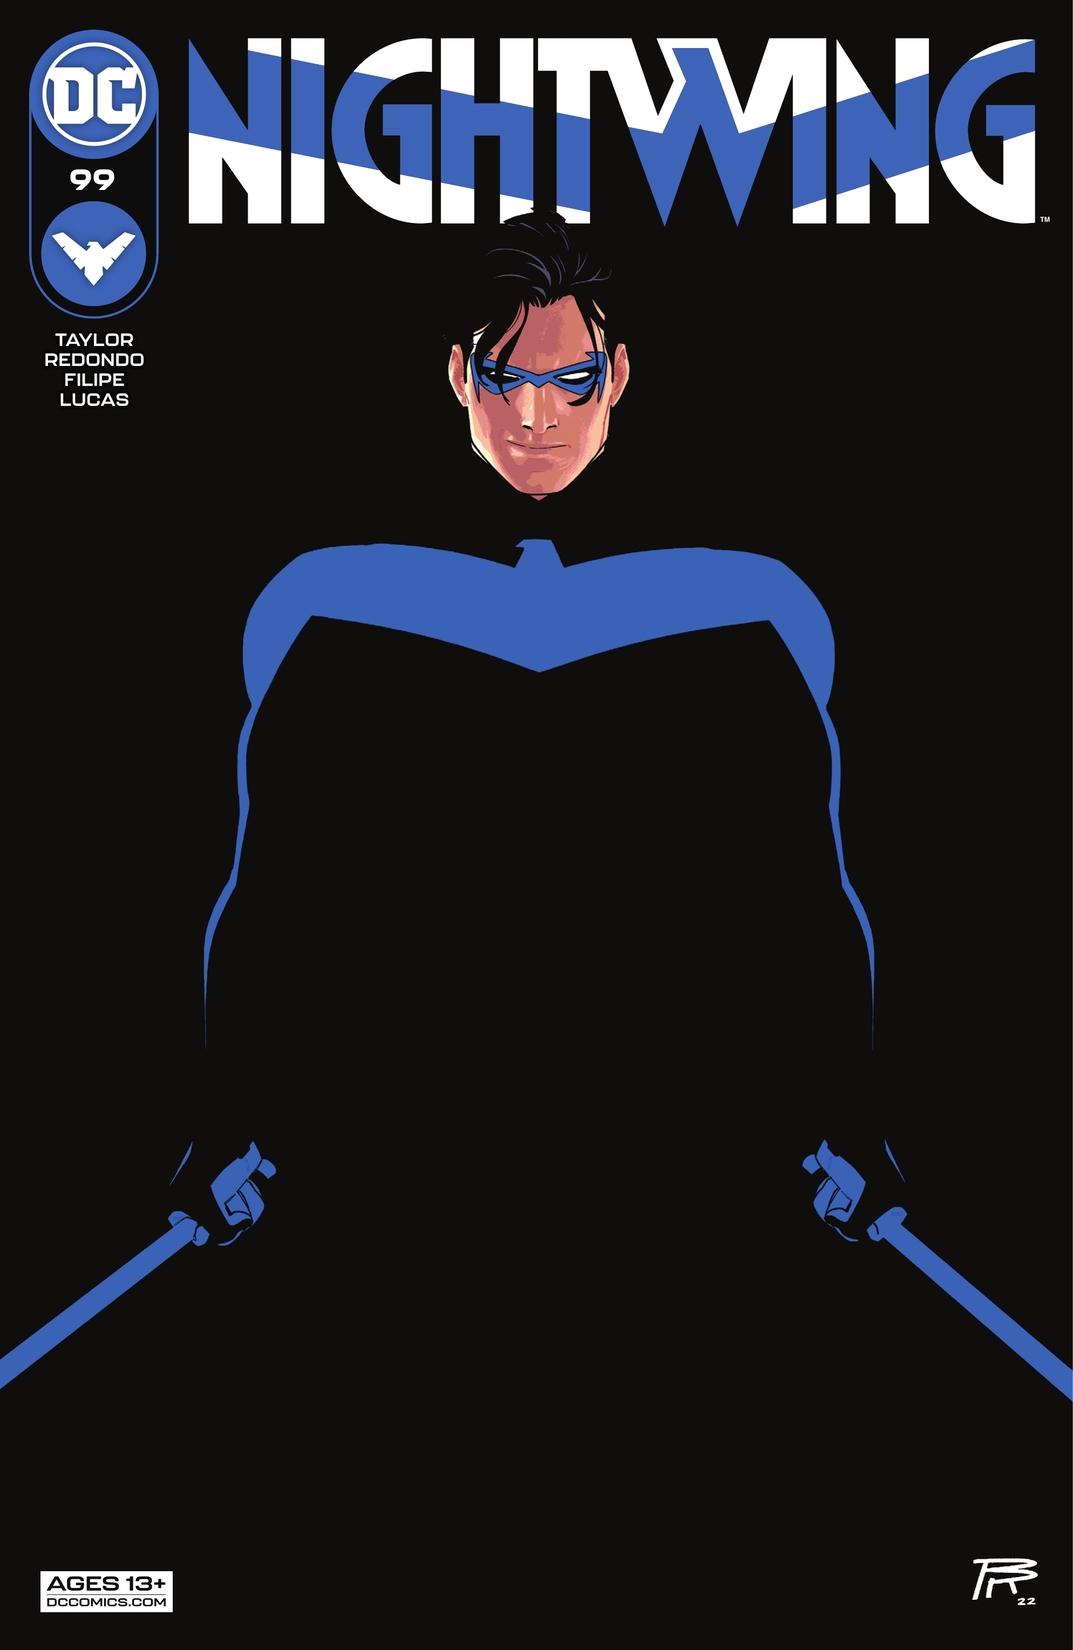 Nightwing (2016-) #99 preview images